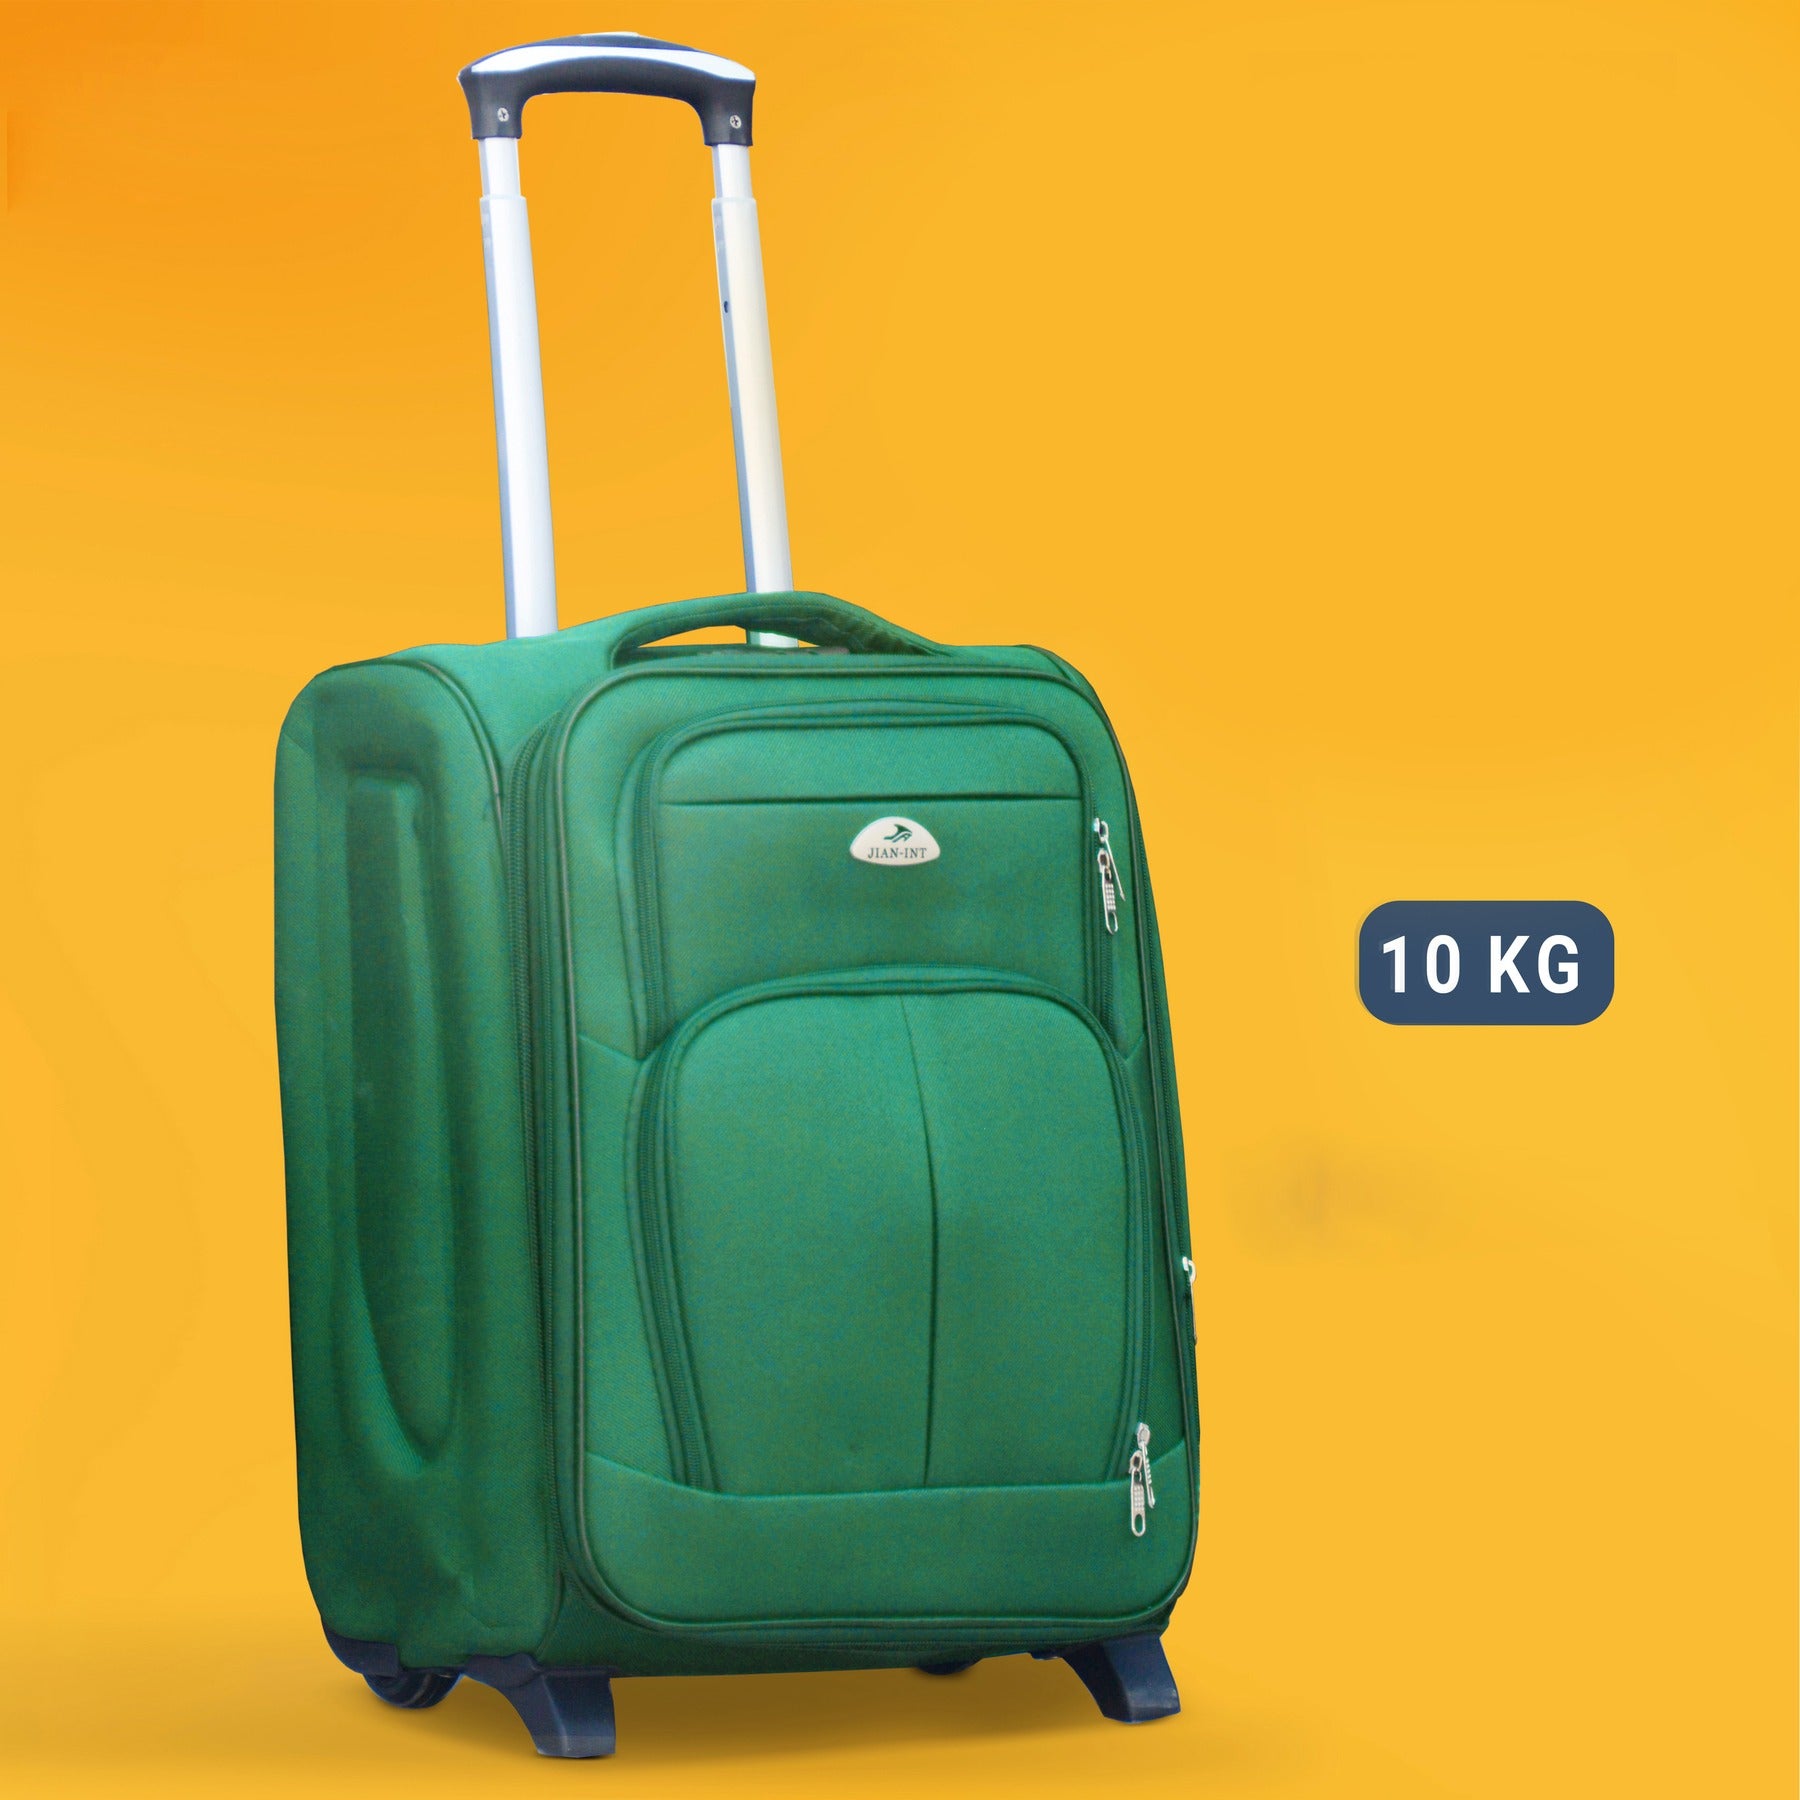 Travel Luggage Sale 10 kg 2 Wheel Lightweight Soft Material | WILGSO2WCX